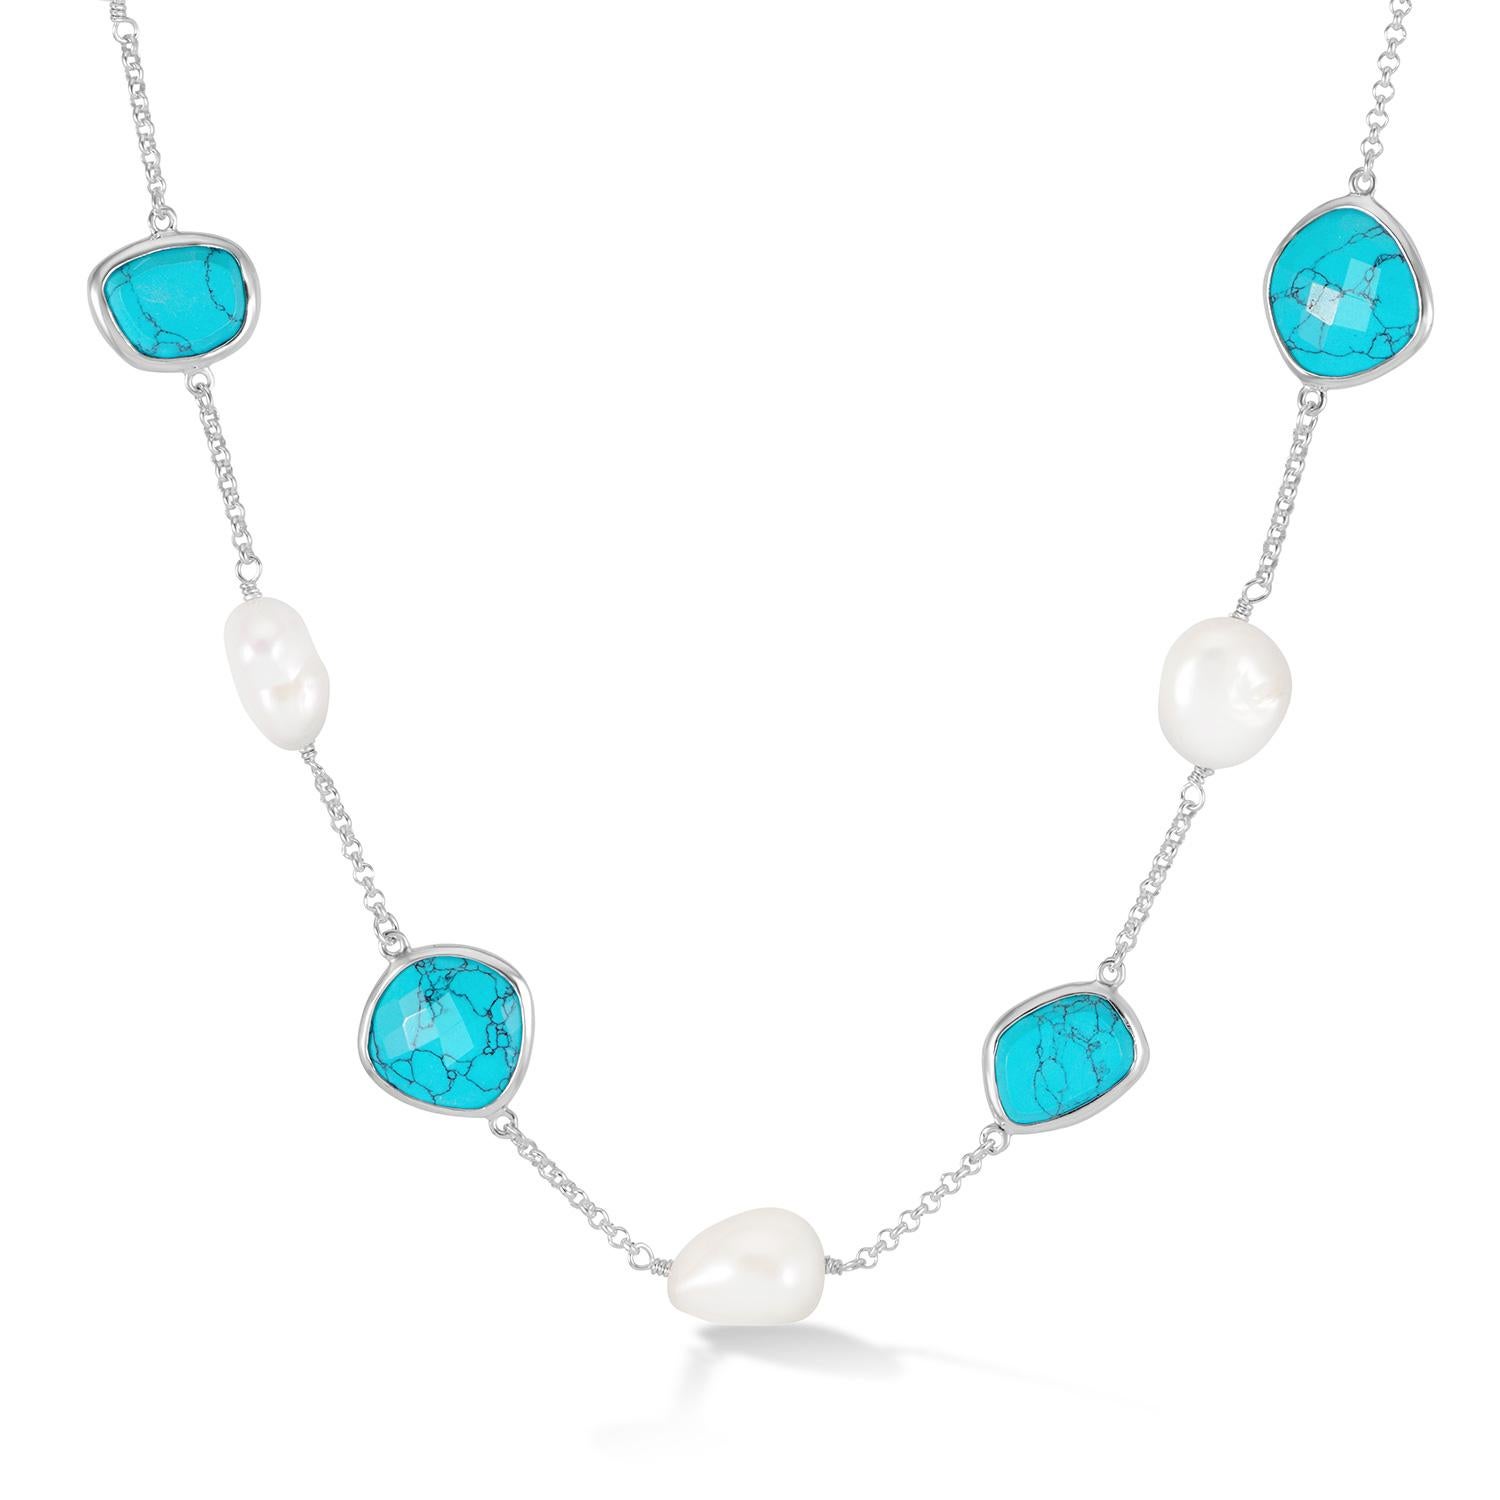 Handcrafted in sterling silver, this chain necklace is adorned with five white baroque pearls and four faceted turquoise gemstones. Baroque pearls are naturally irregular in shape and known for their one-of-a-kind nature. The piece is complete with